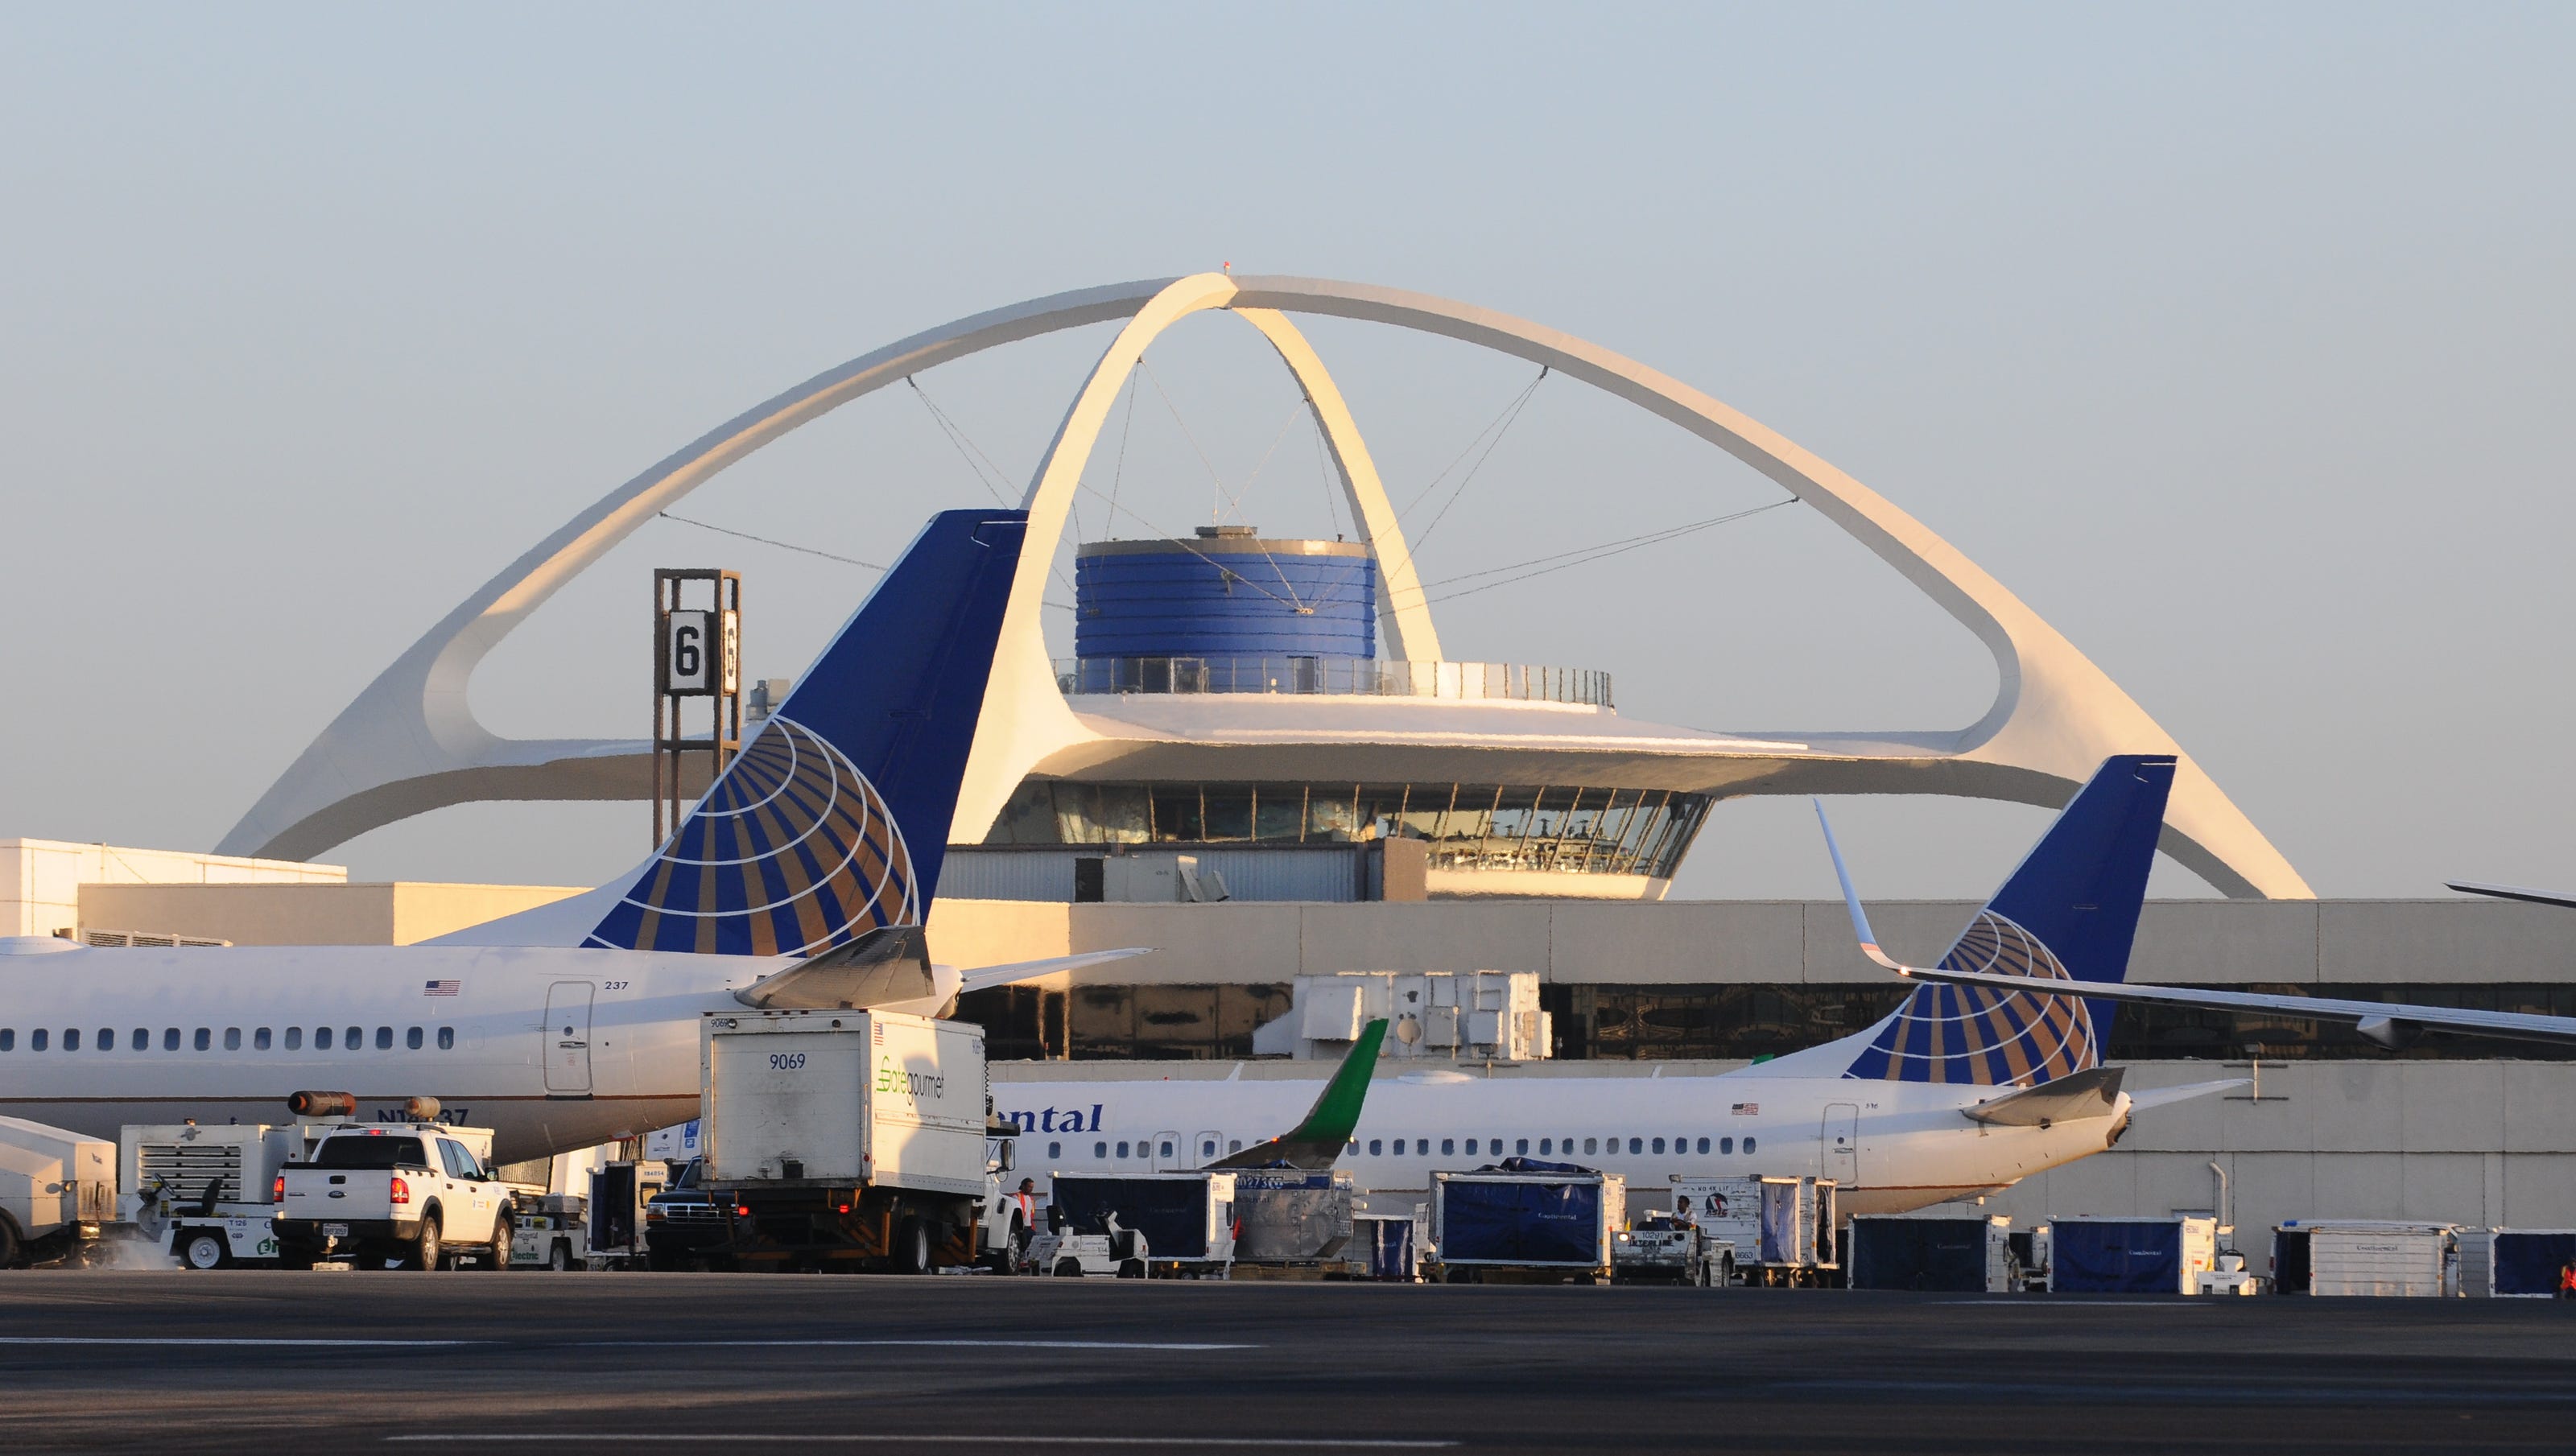 lax airport tour